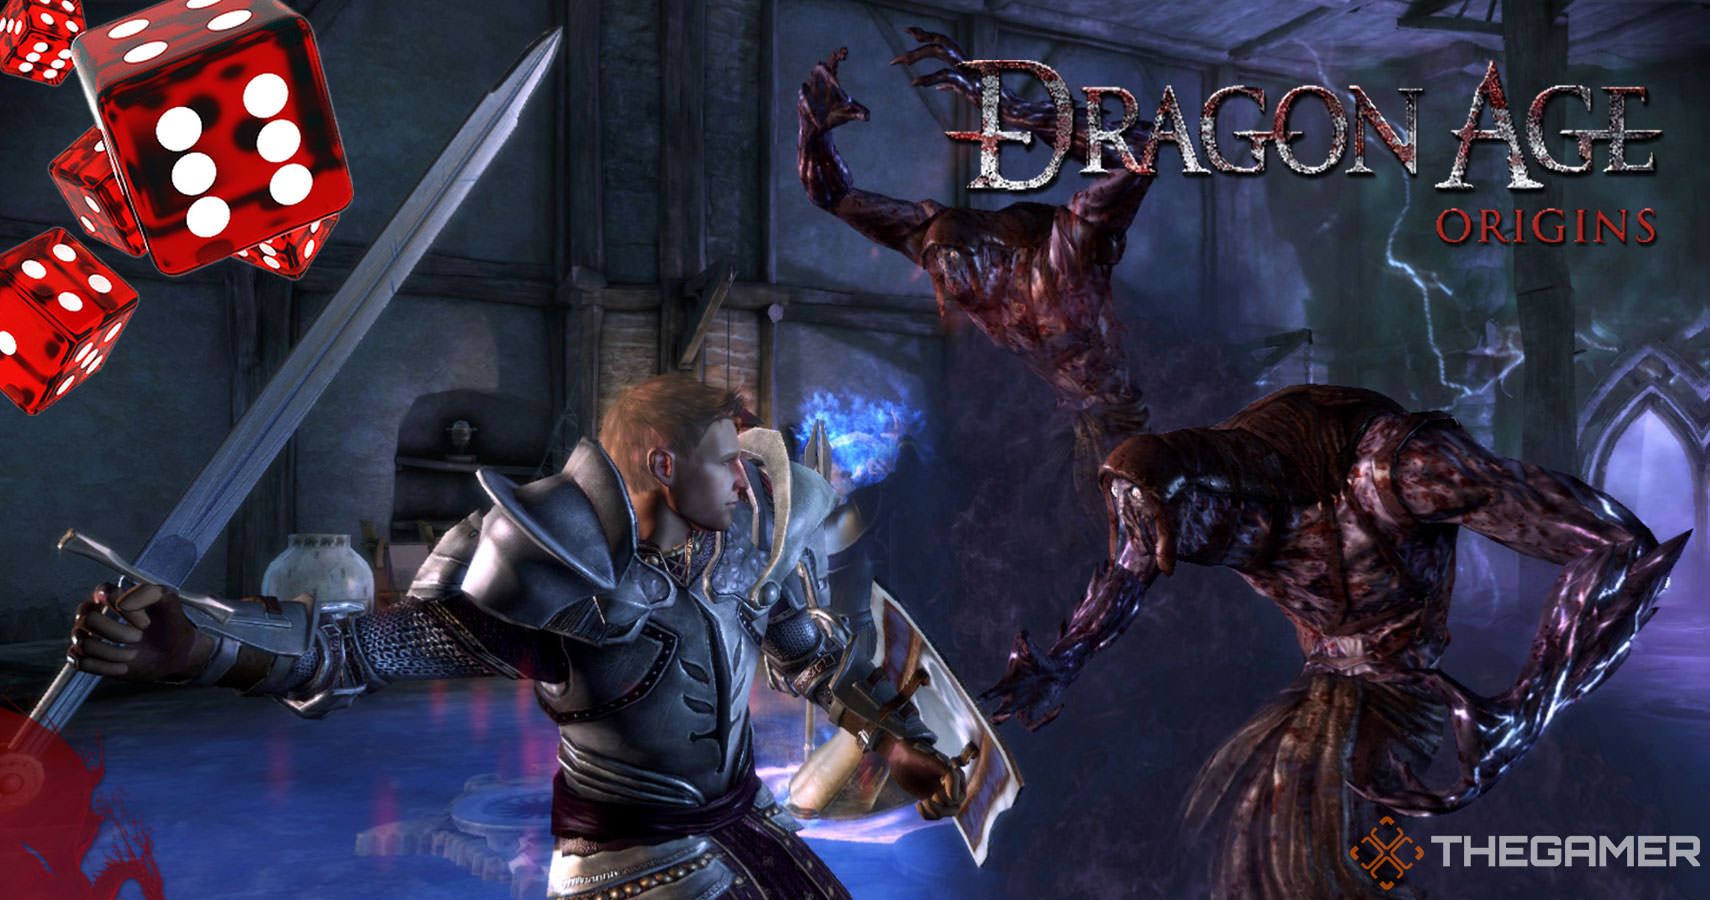 Dragon Age: Origins - Game Overview